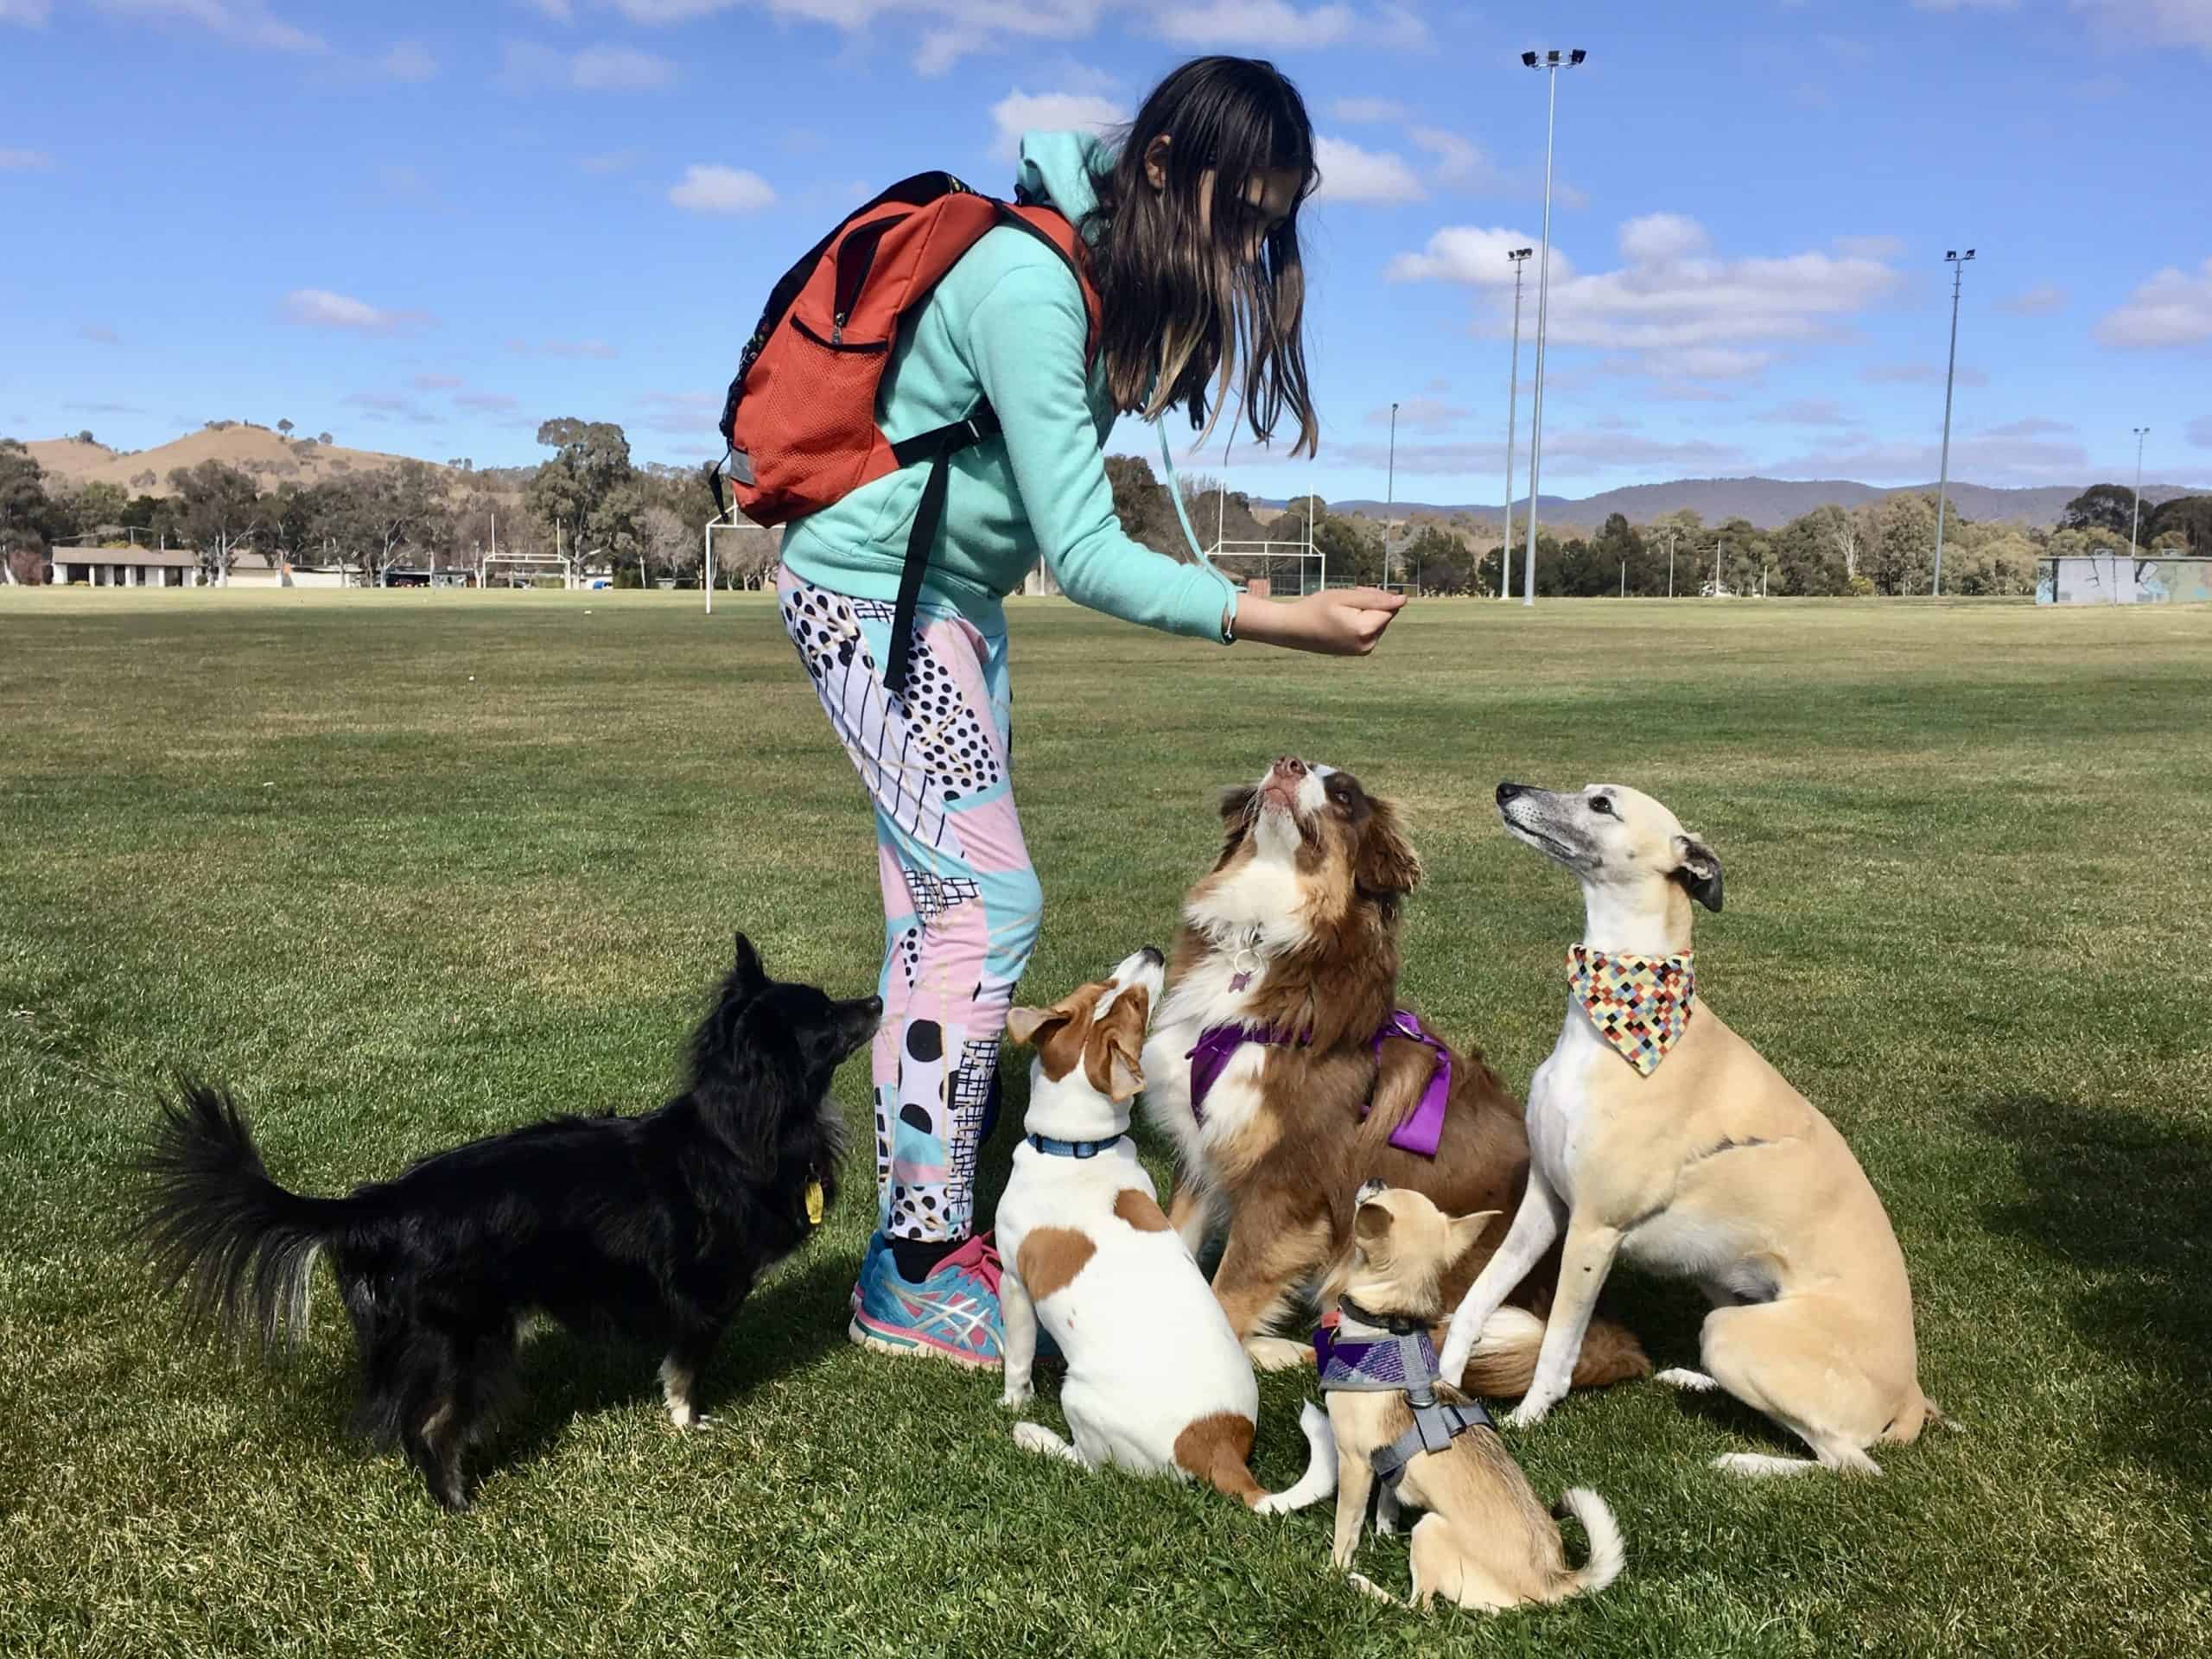 what do i need for dog walking